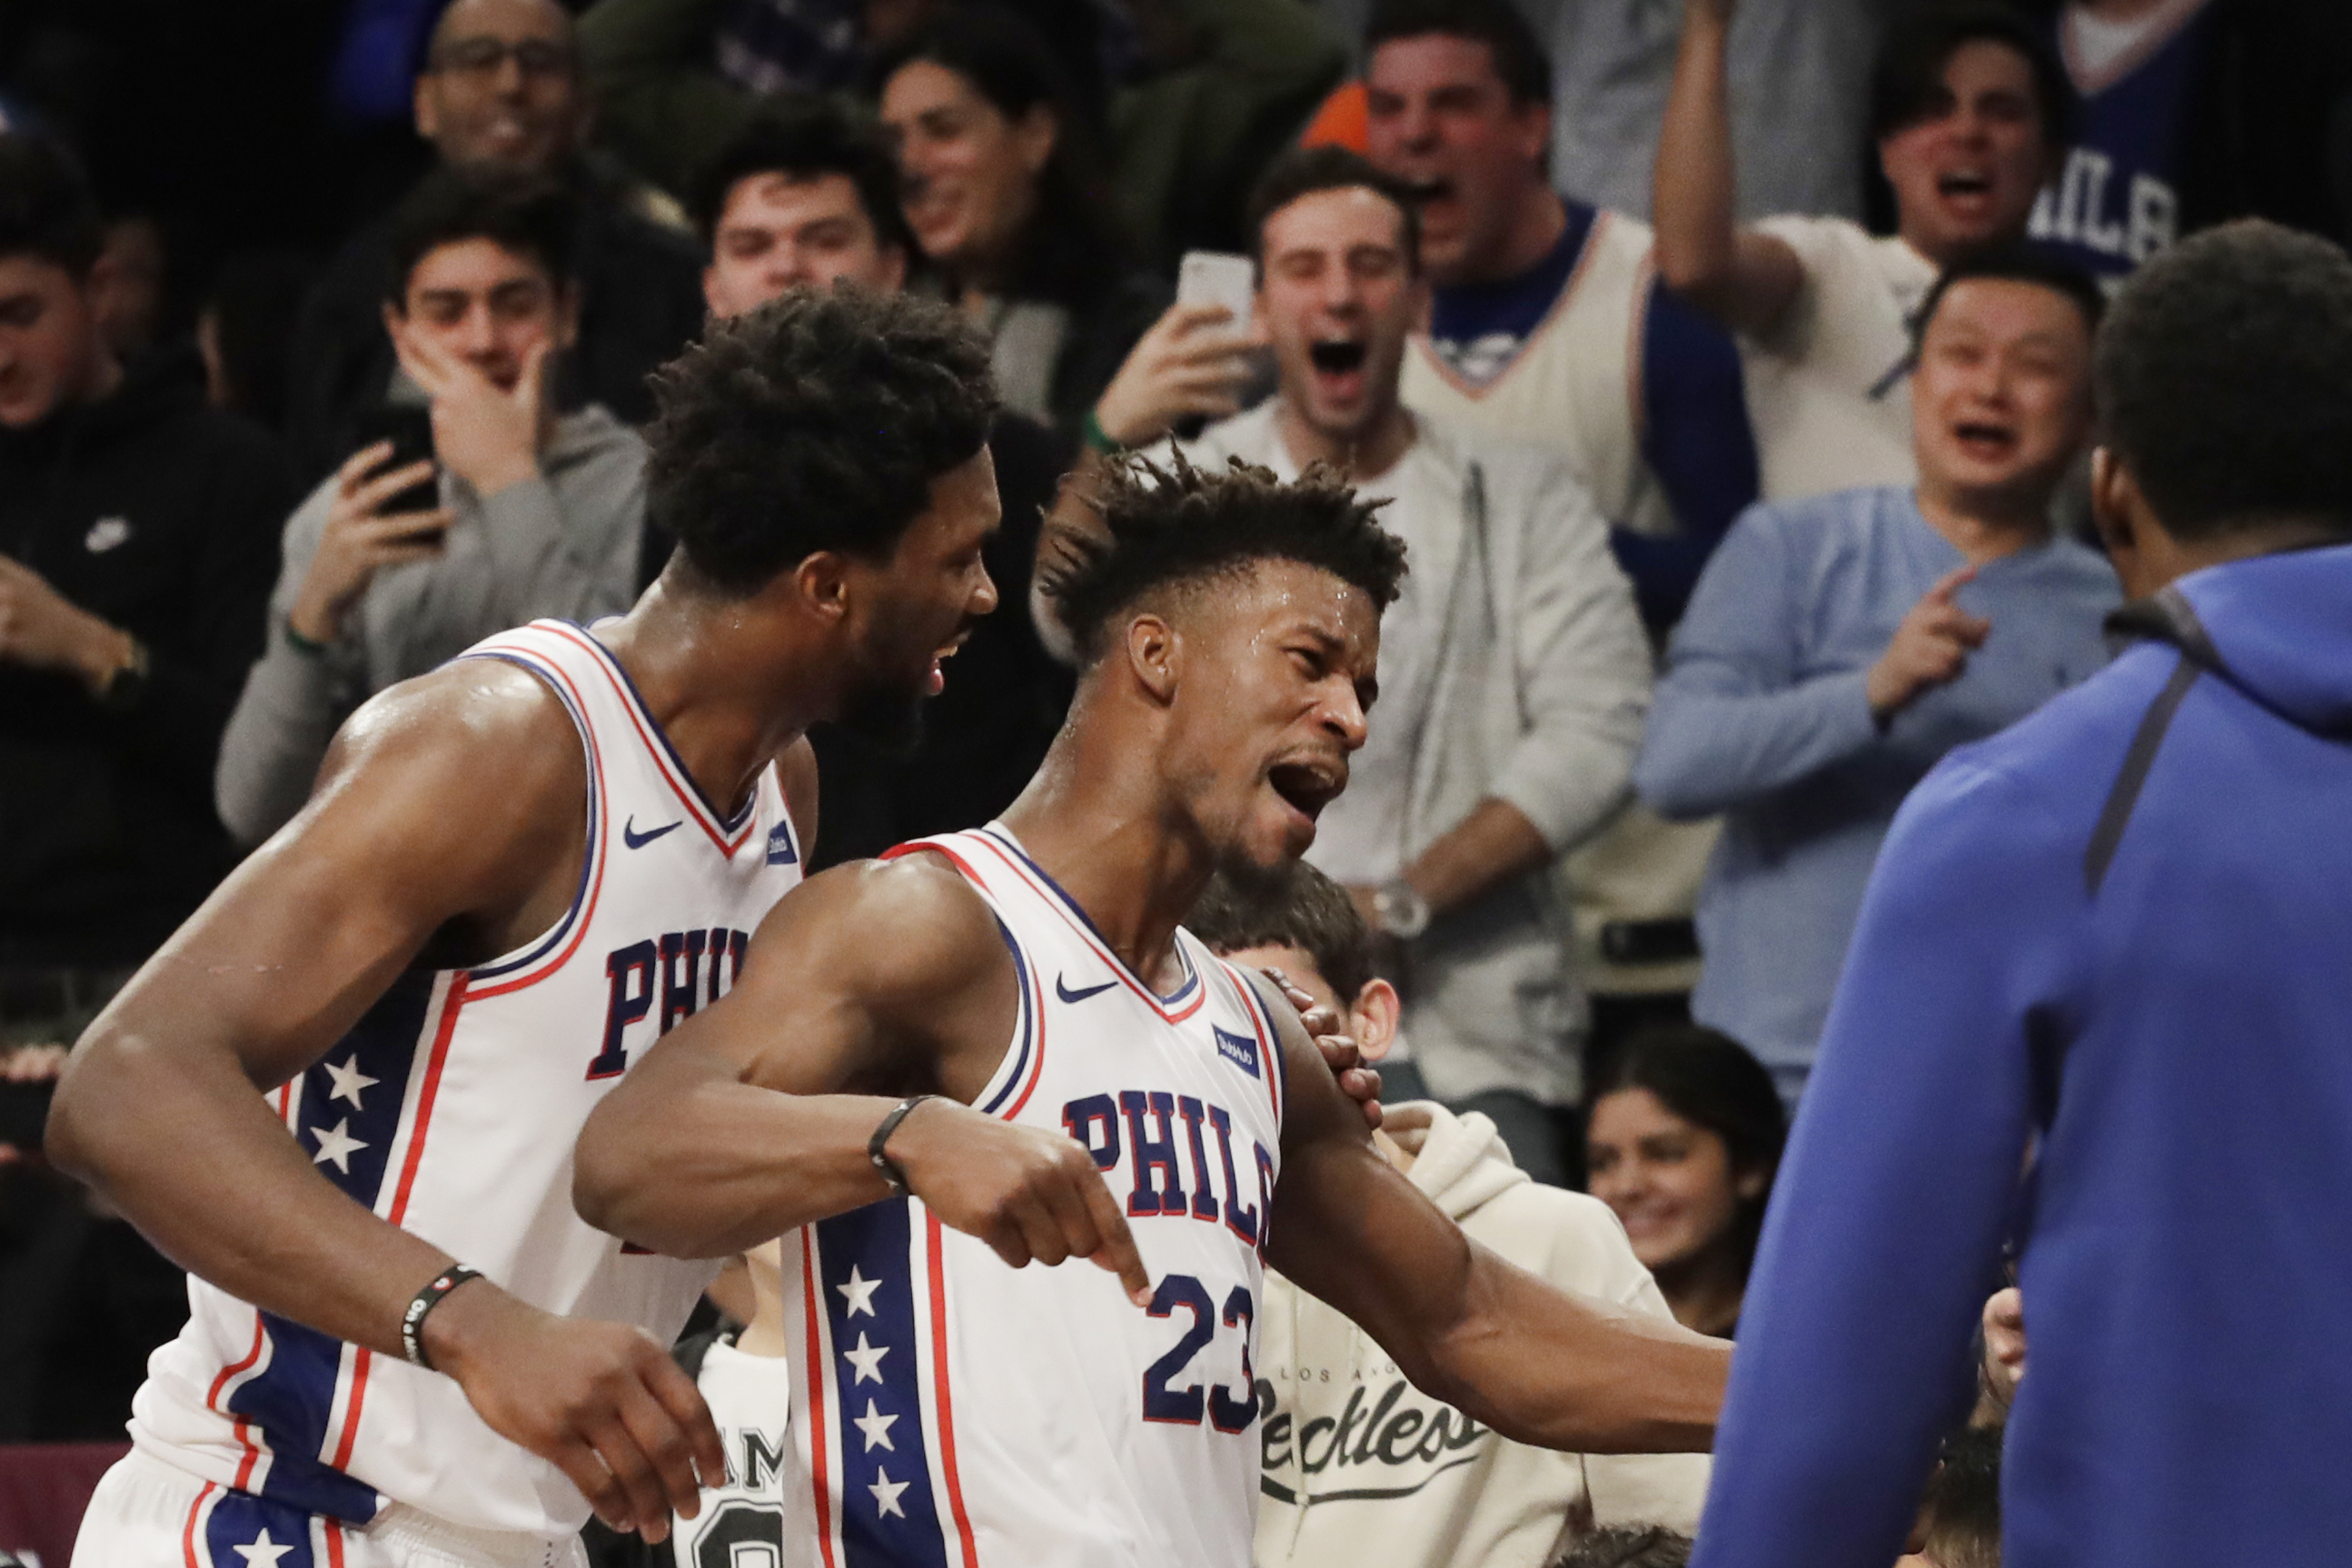 Butler hits another winning 3 as Sixers rally past Nets